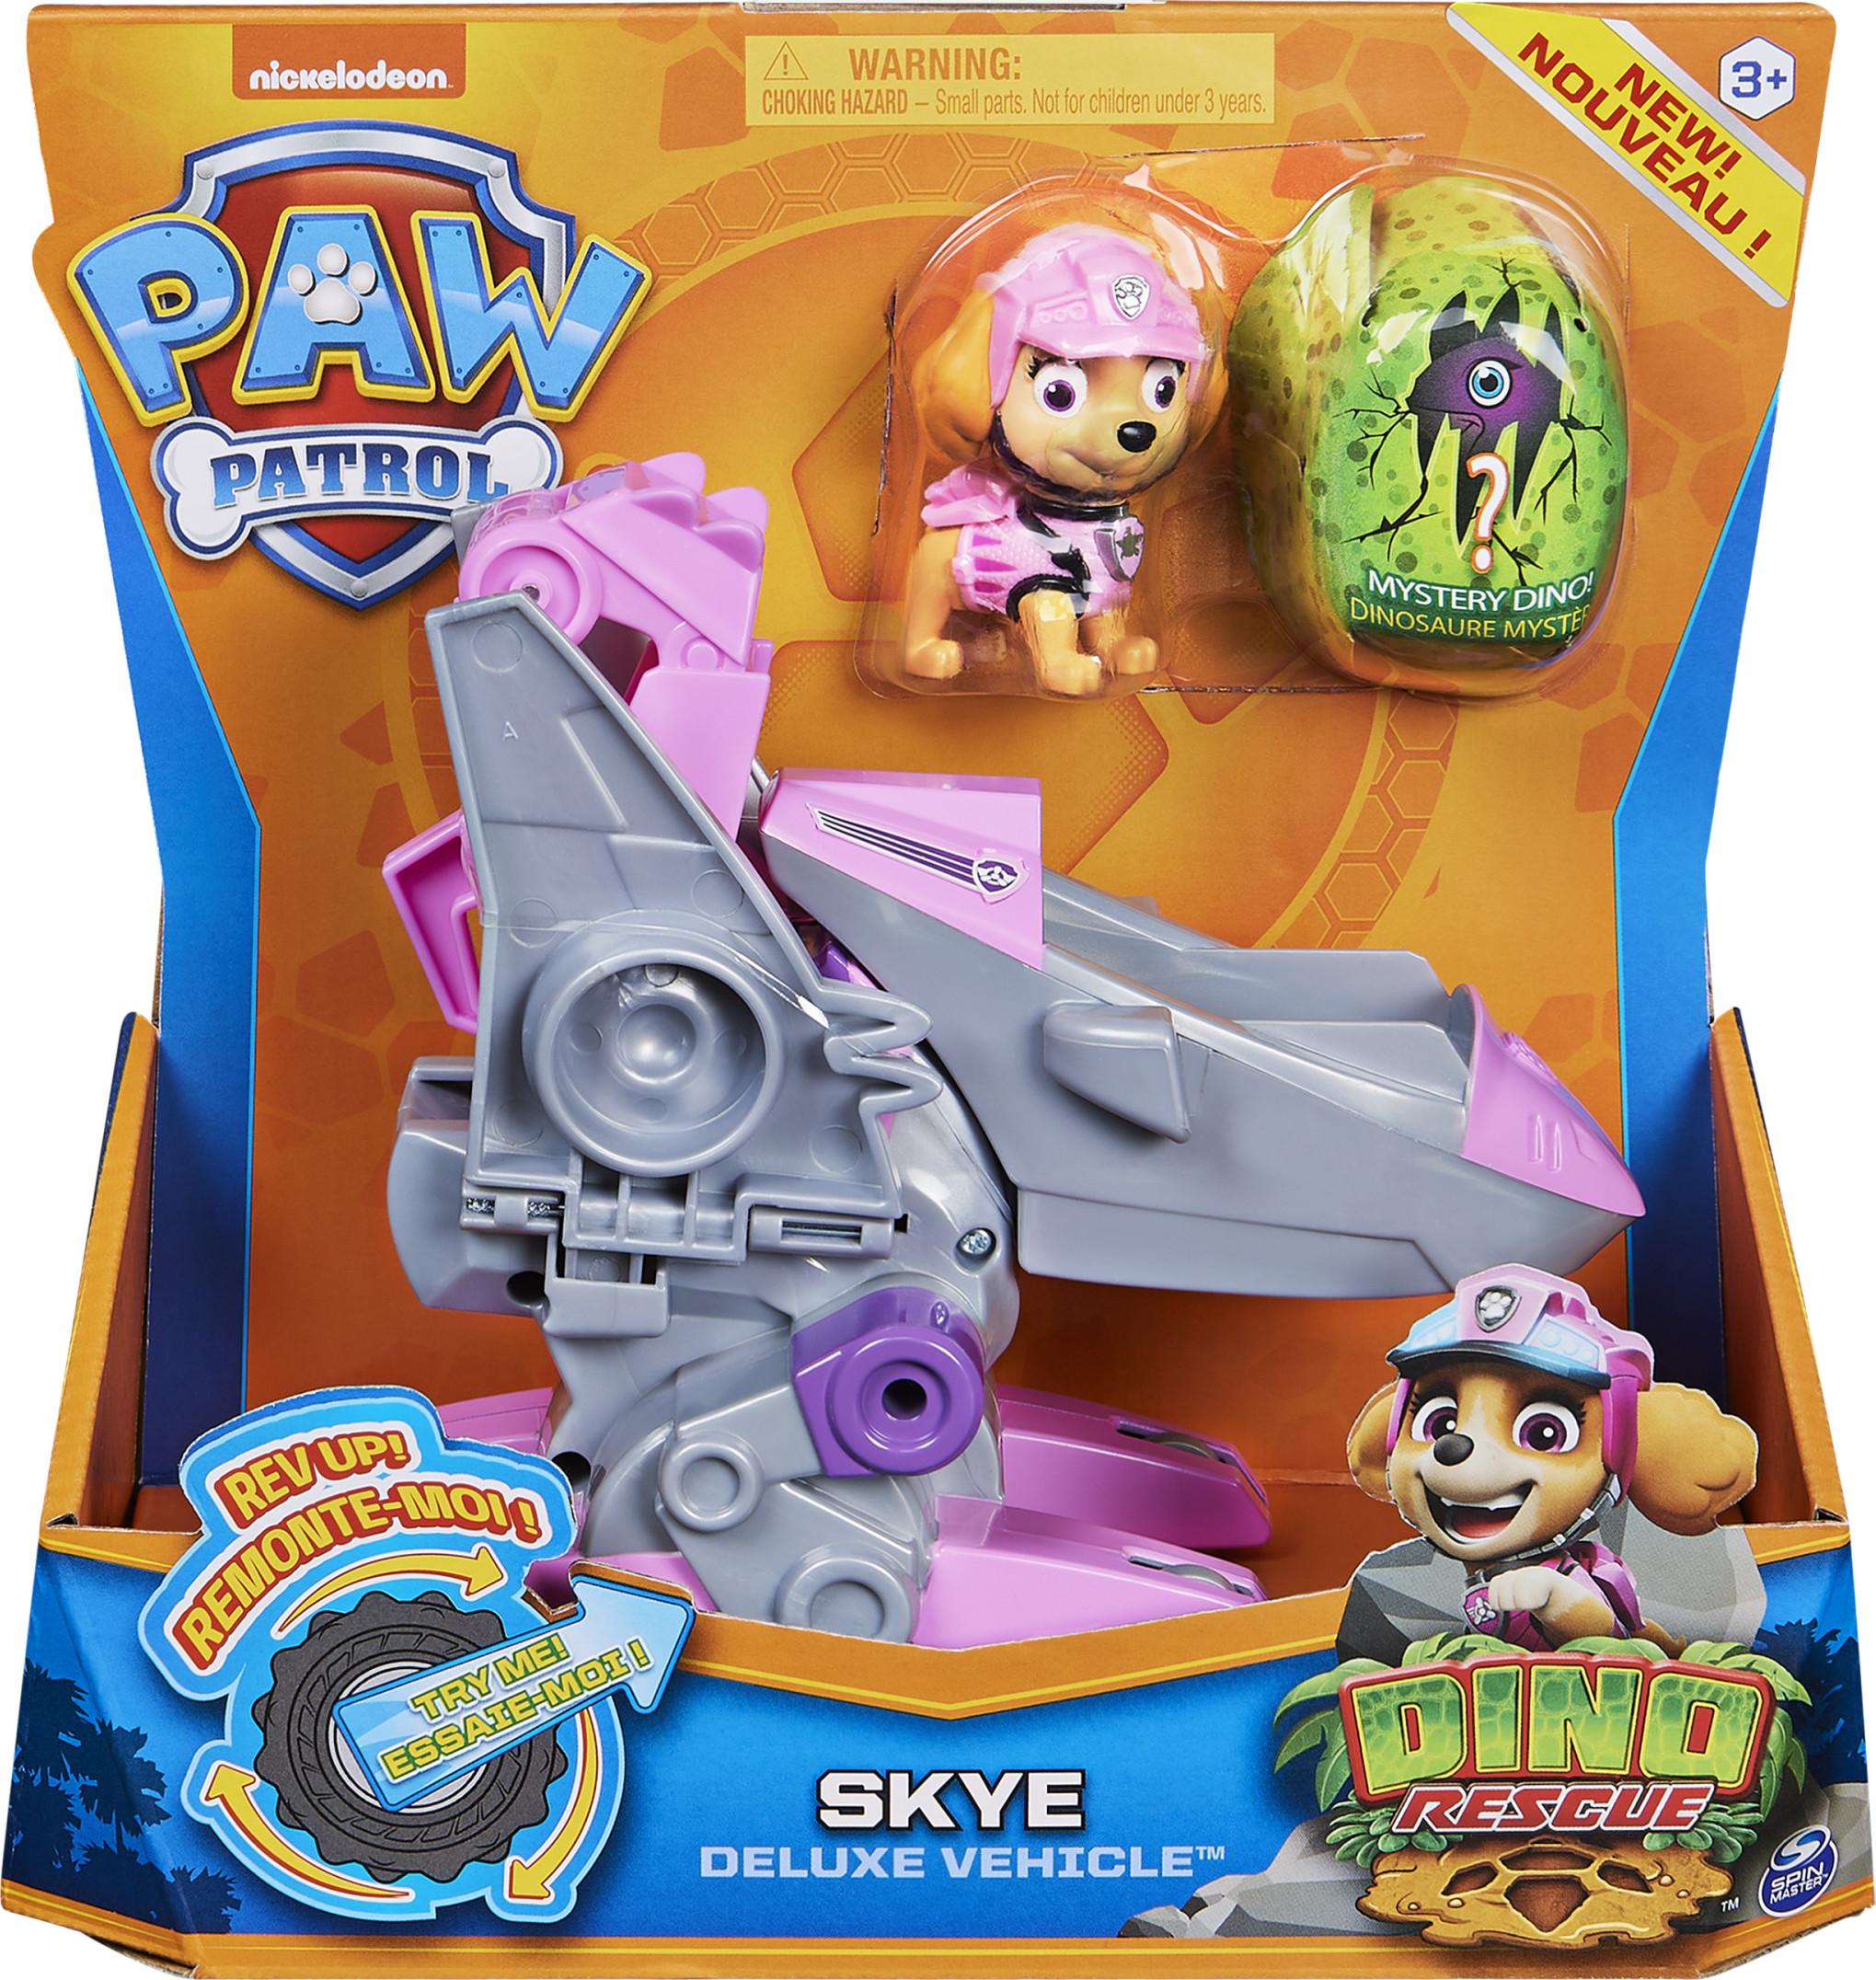 PAW Patrol, Dino Rescue Skye’s Deluxe Rev Up Vehicle with Mystery Dinosaur Figure - image 2 of 6